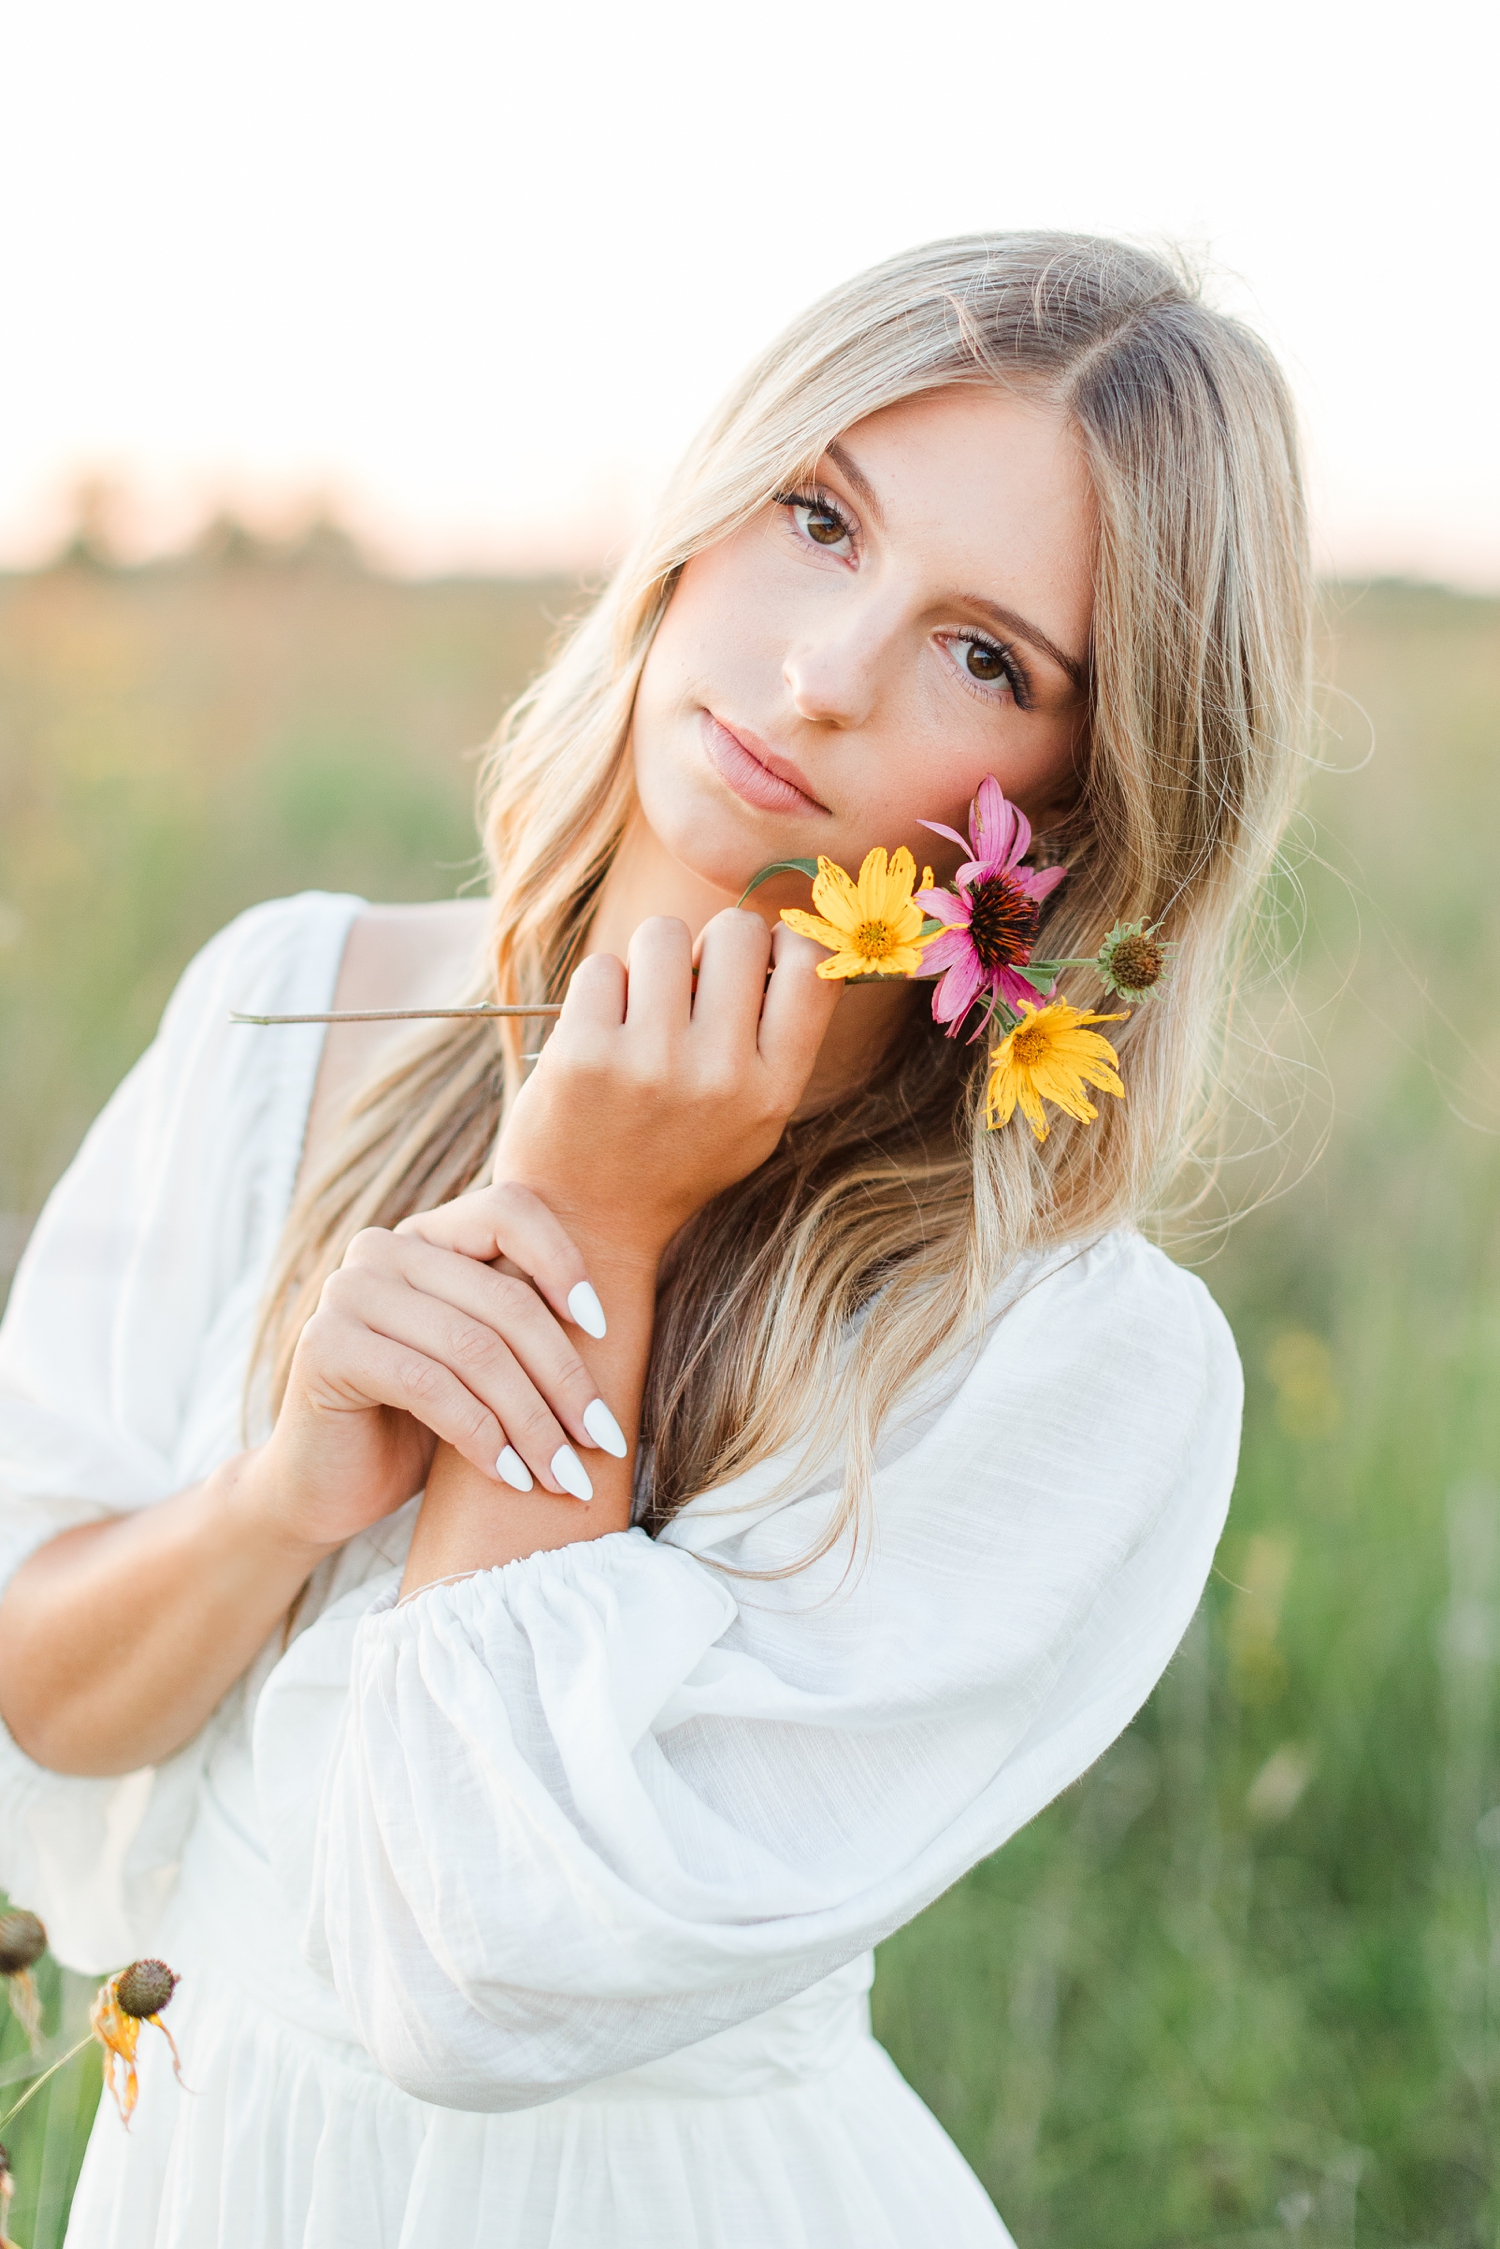 Eden stands in a wildflower field at golden hour wearing a white dress holding flowers to her cheek | CB Studio